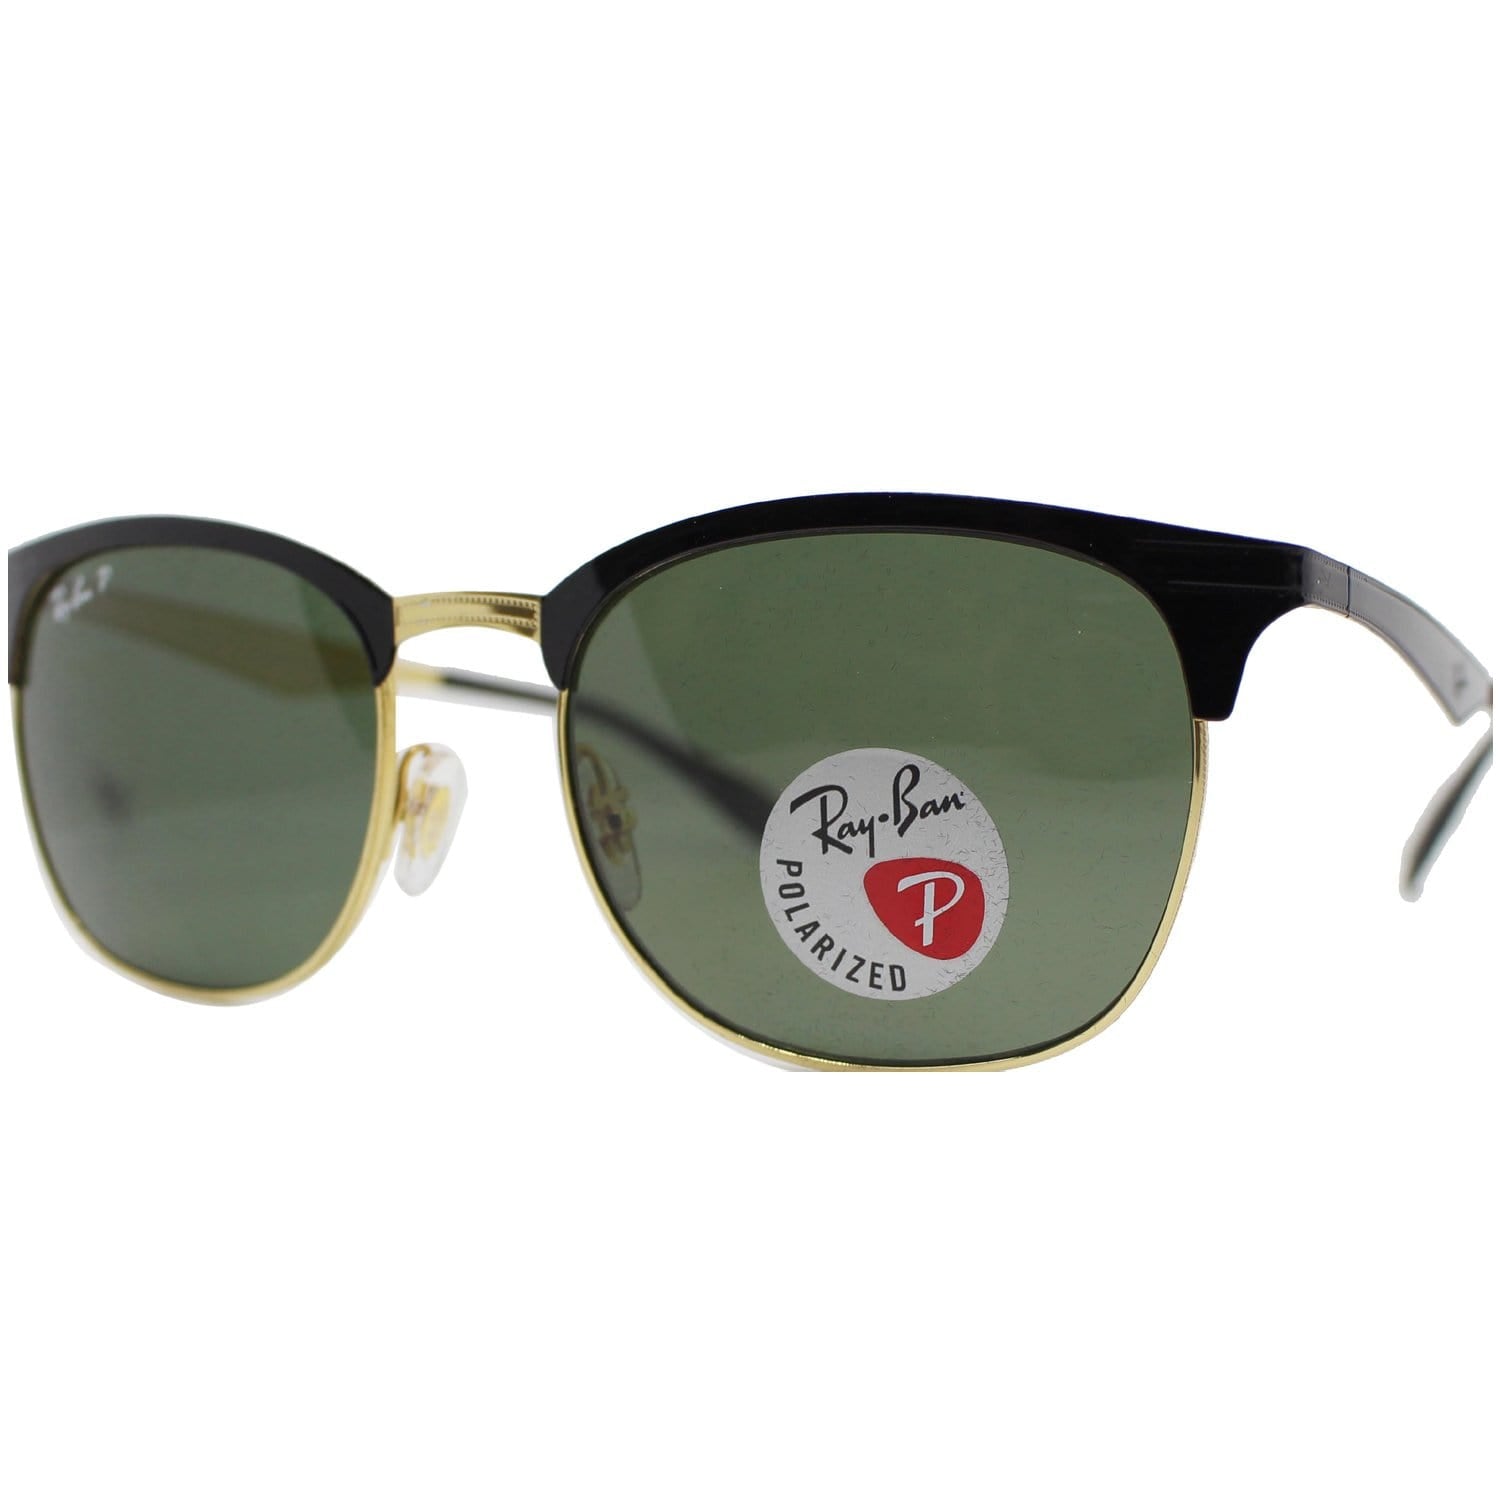 RAY-BAN RB3538 187/9A Sunglasses Green Classic G-15 Polarized Lens